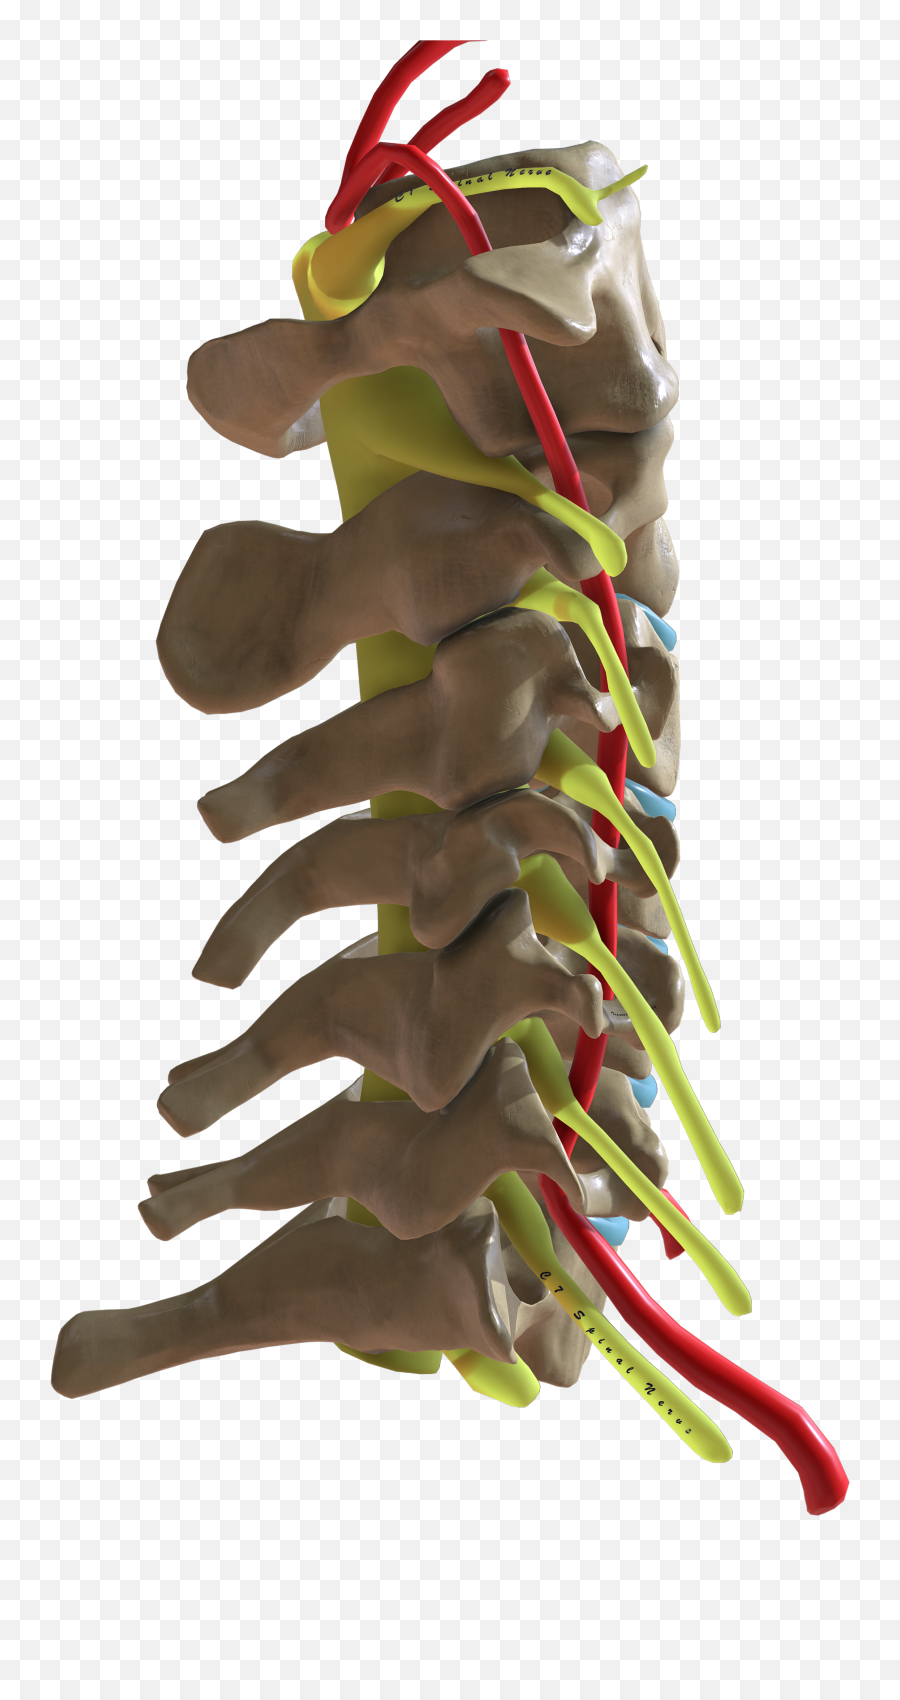 Filecervical Spine Lateral Viewpng - Wikimedia Commons Chili Pepper,Spine Png